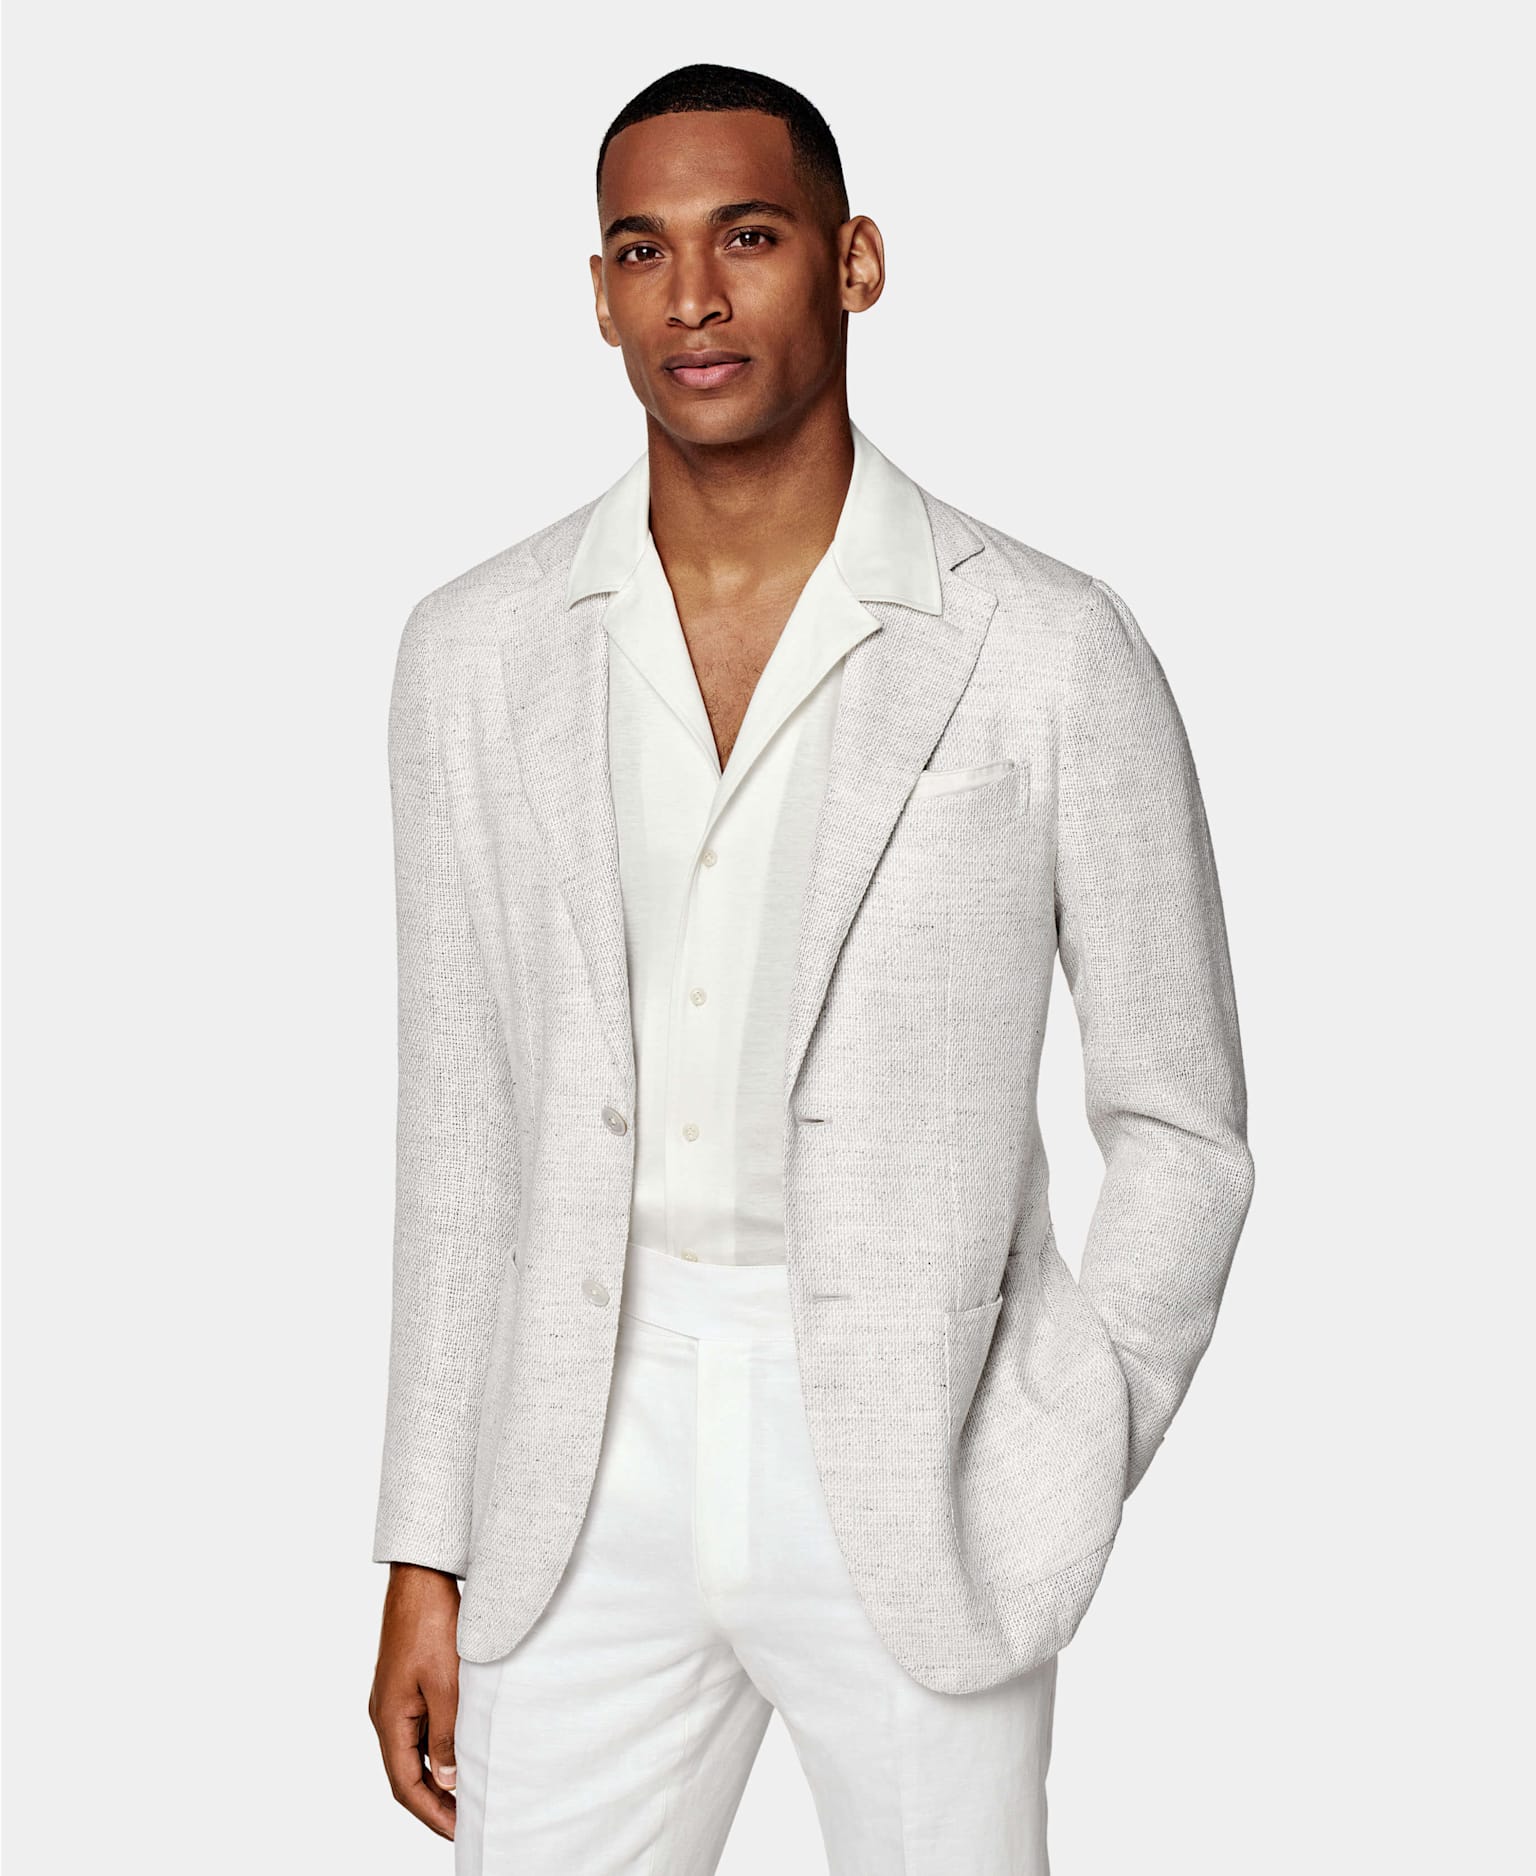 A giro inglese jacket can complete the summer wedding look.